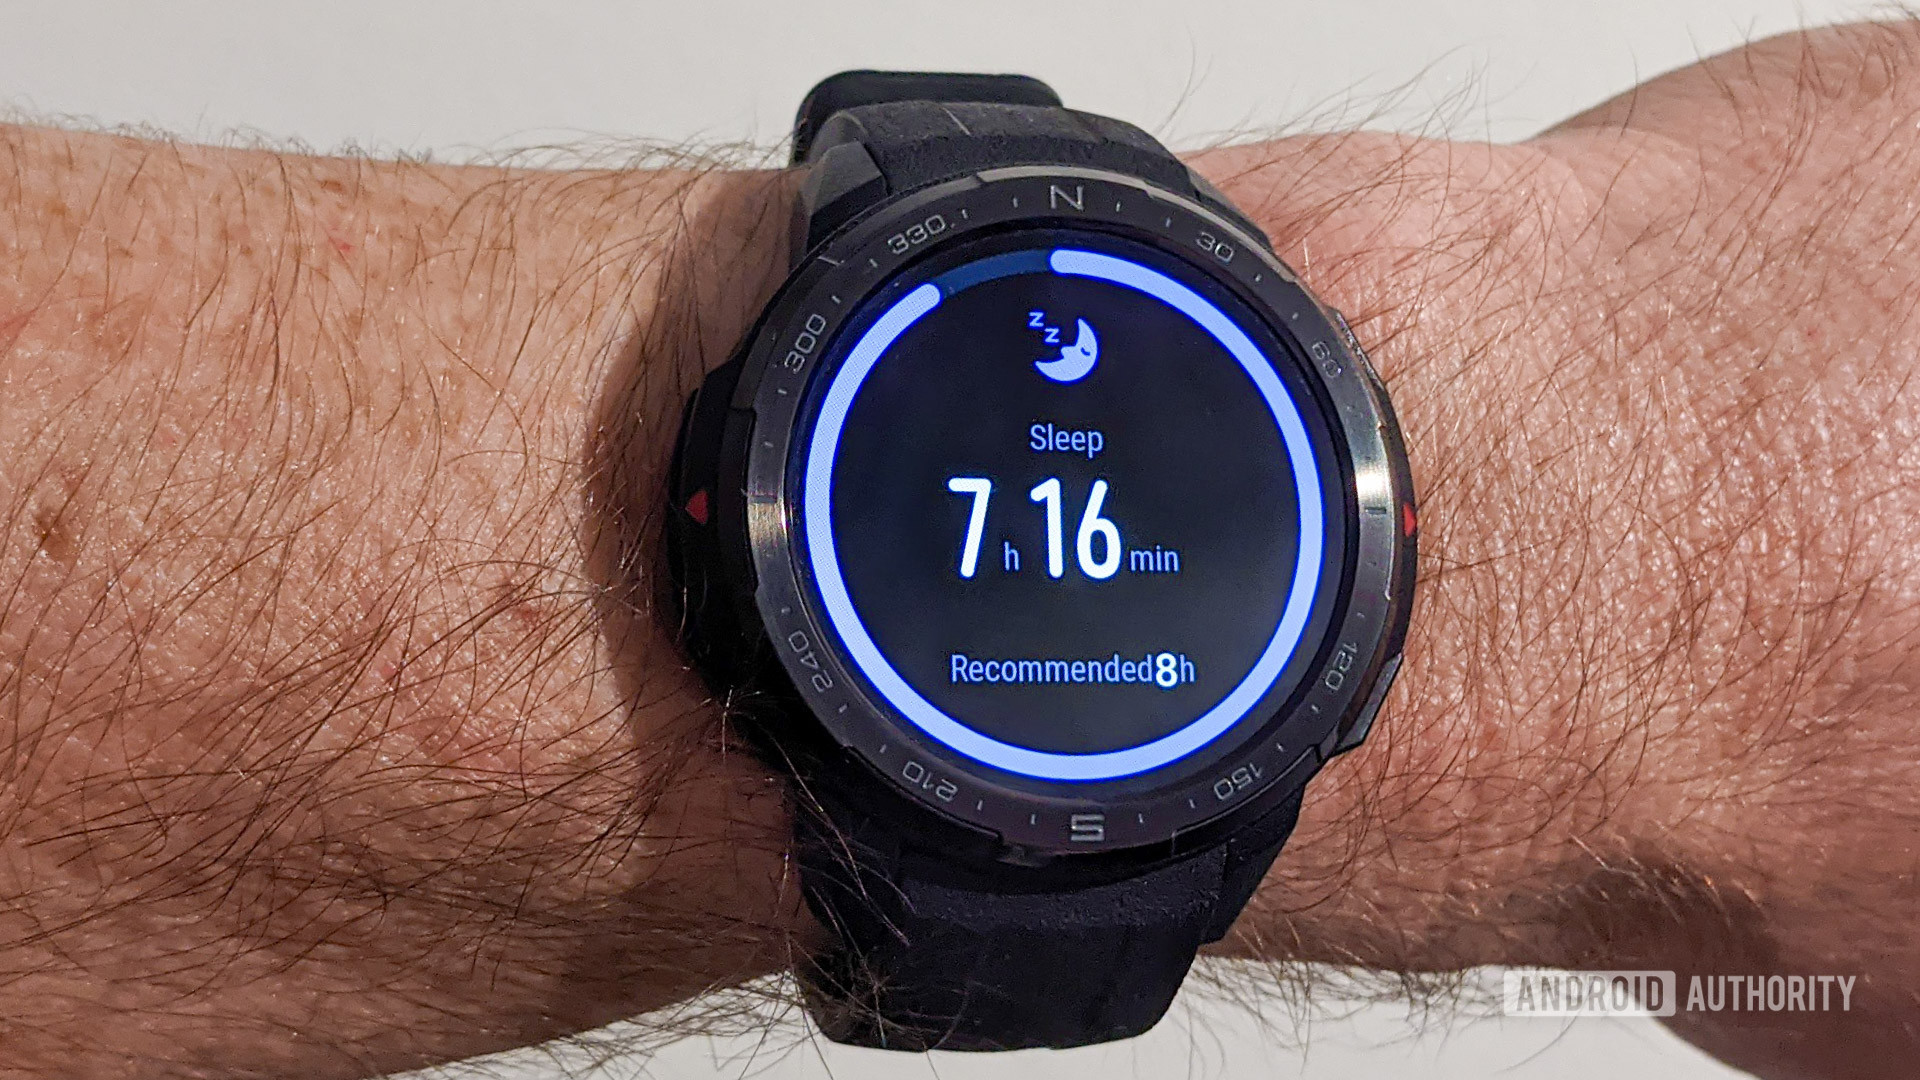 HONOR Watch GS Pro sleep tracking watch face